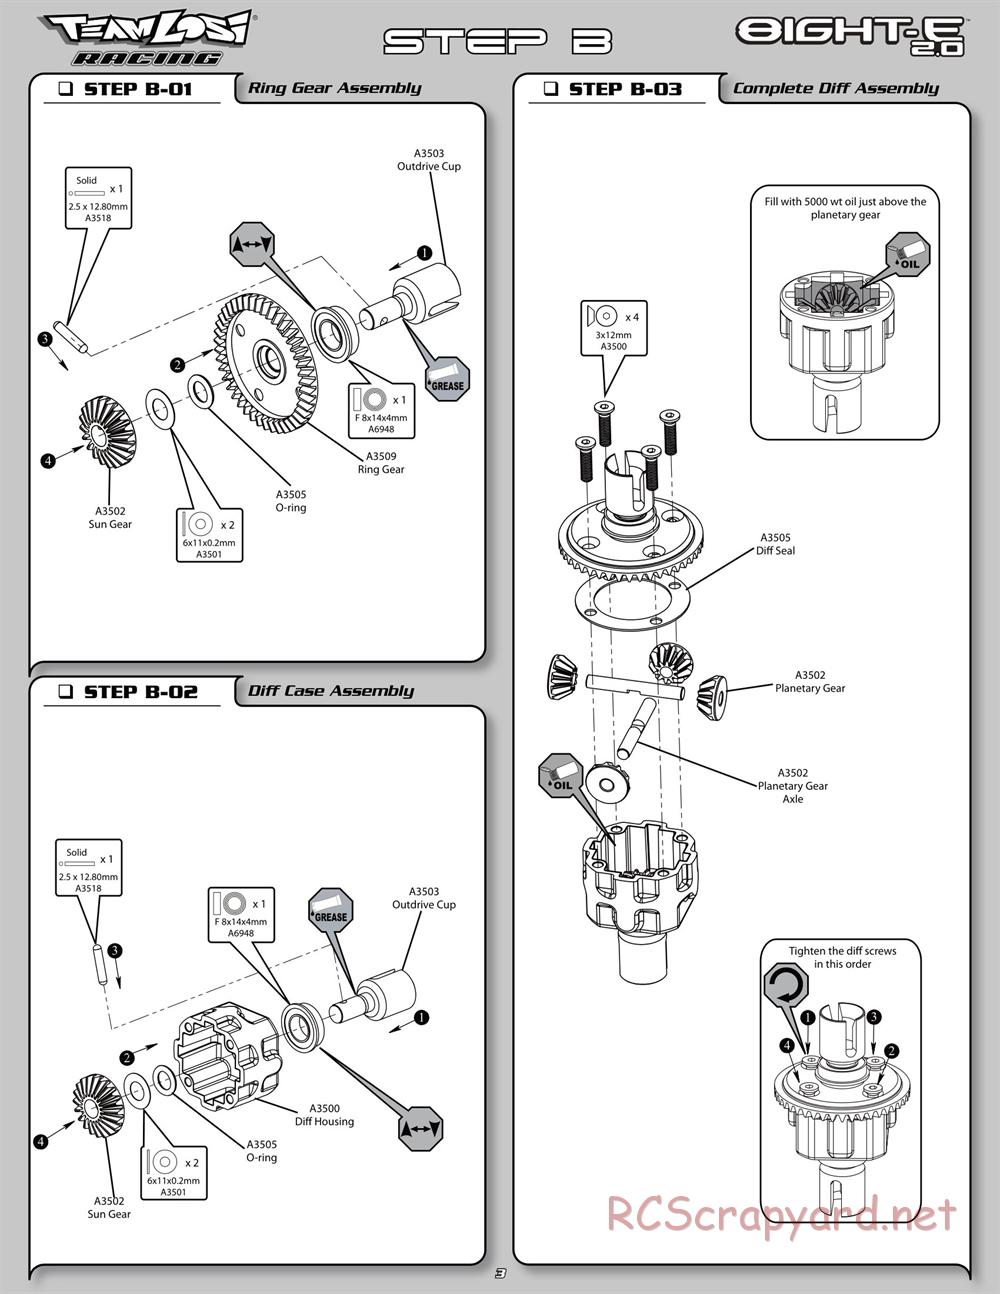 Team Losi - 8ight-E 2.0 Race Roller - Manual - Page 10